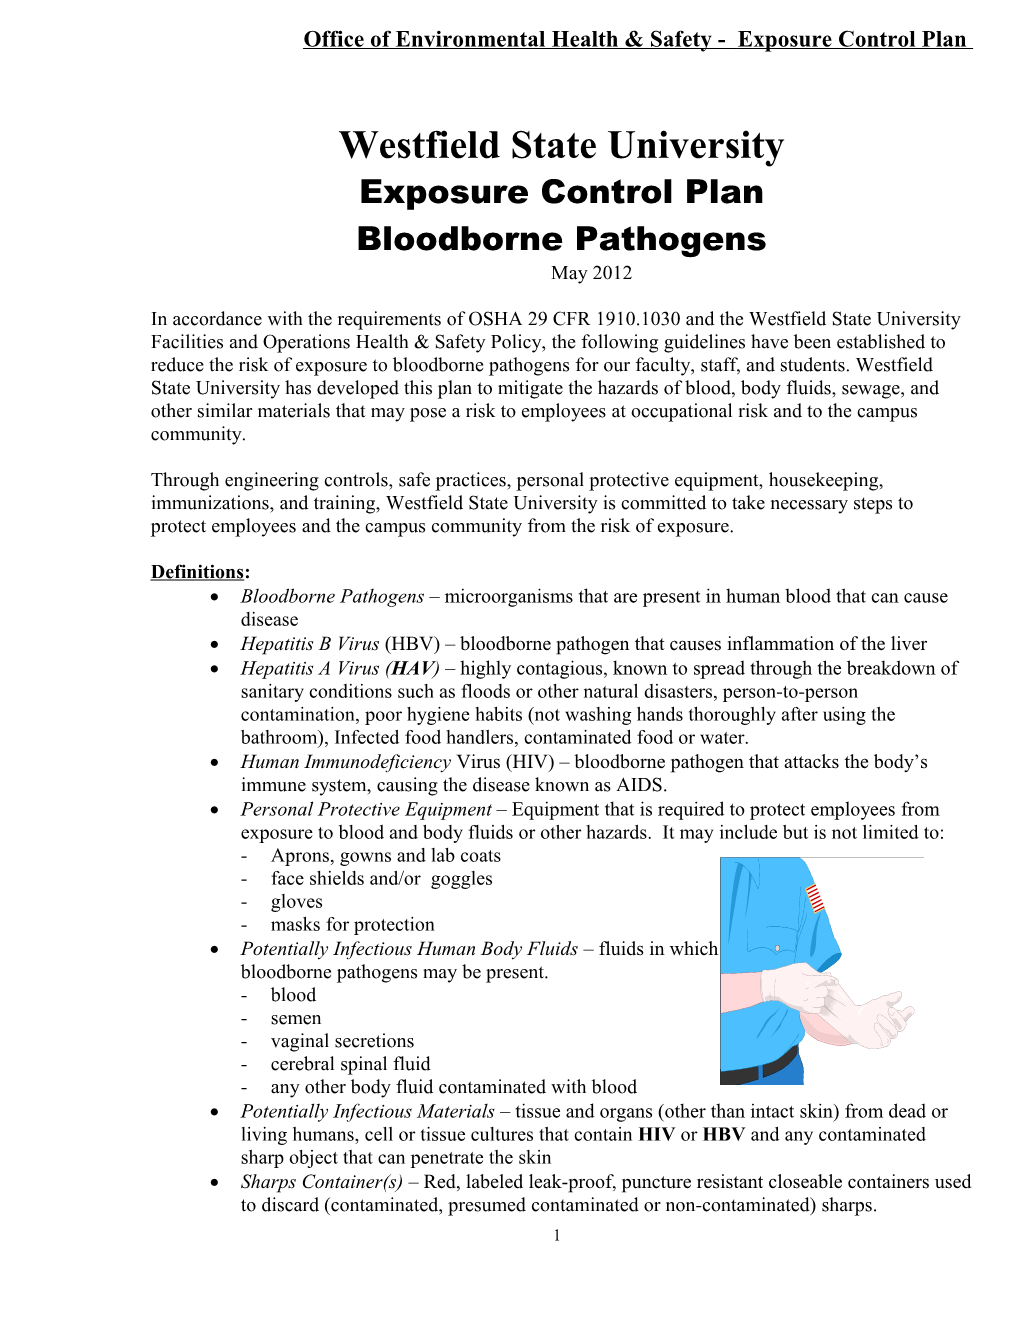 Office of Environmental Health & Safety - Exposure Control Plan